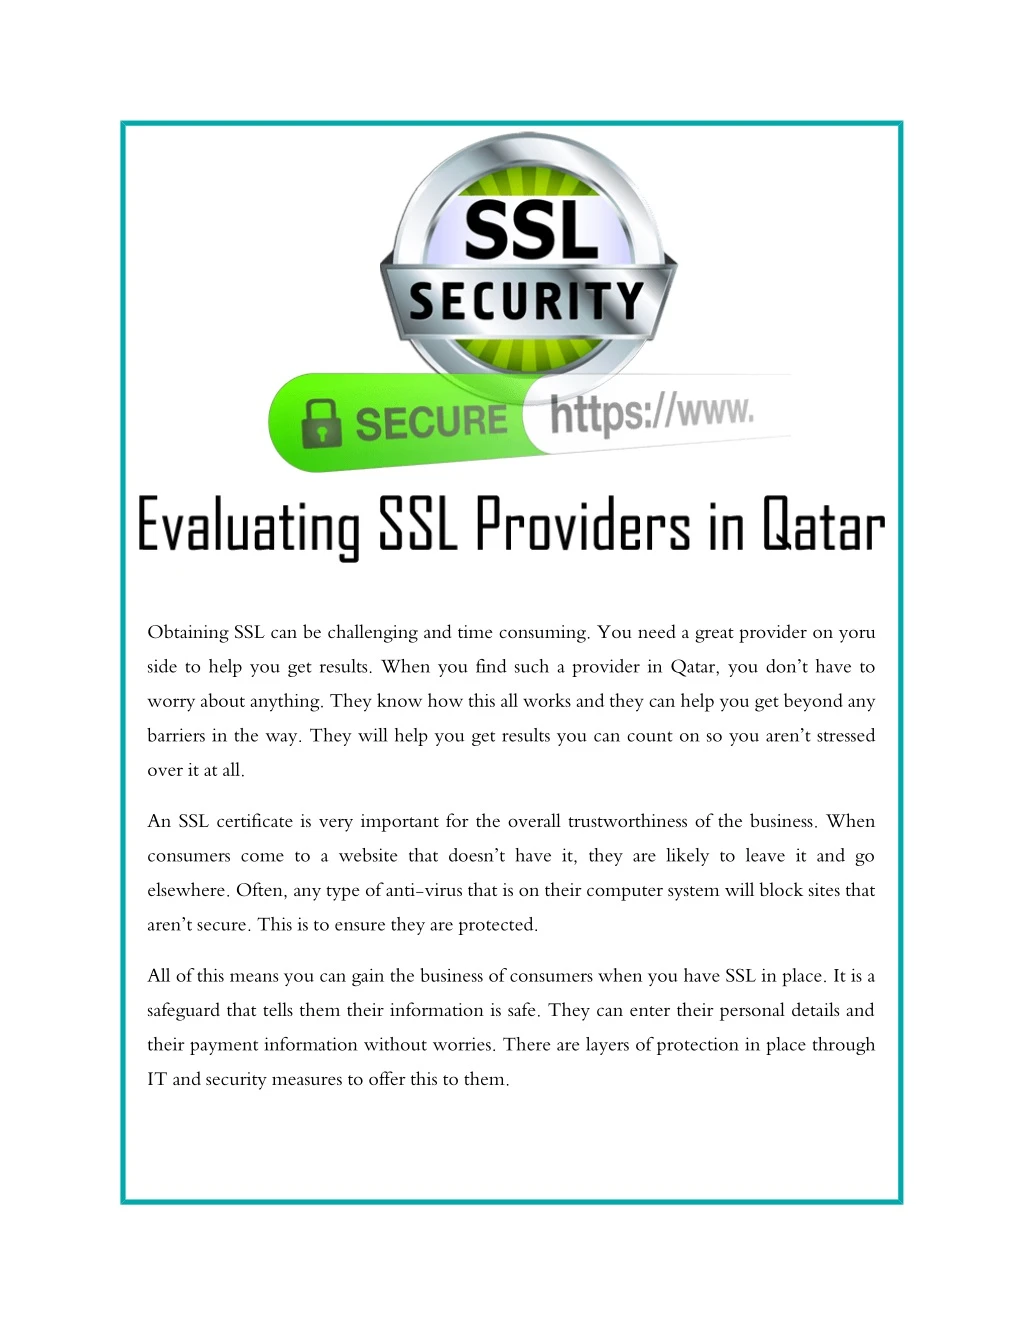 obtaining ssl can be challenging and time